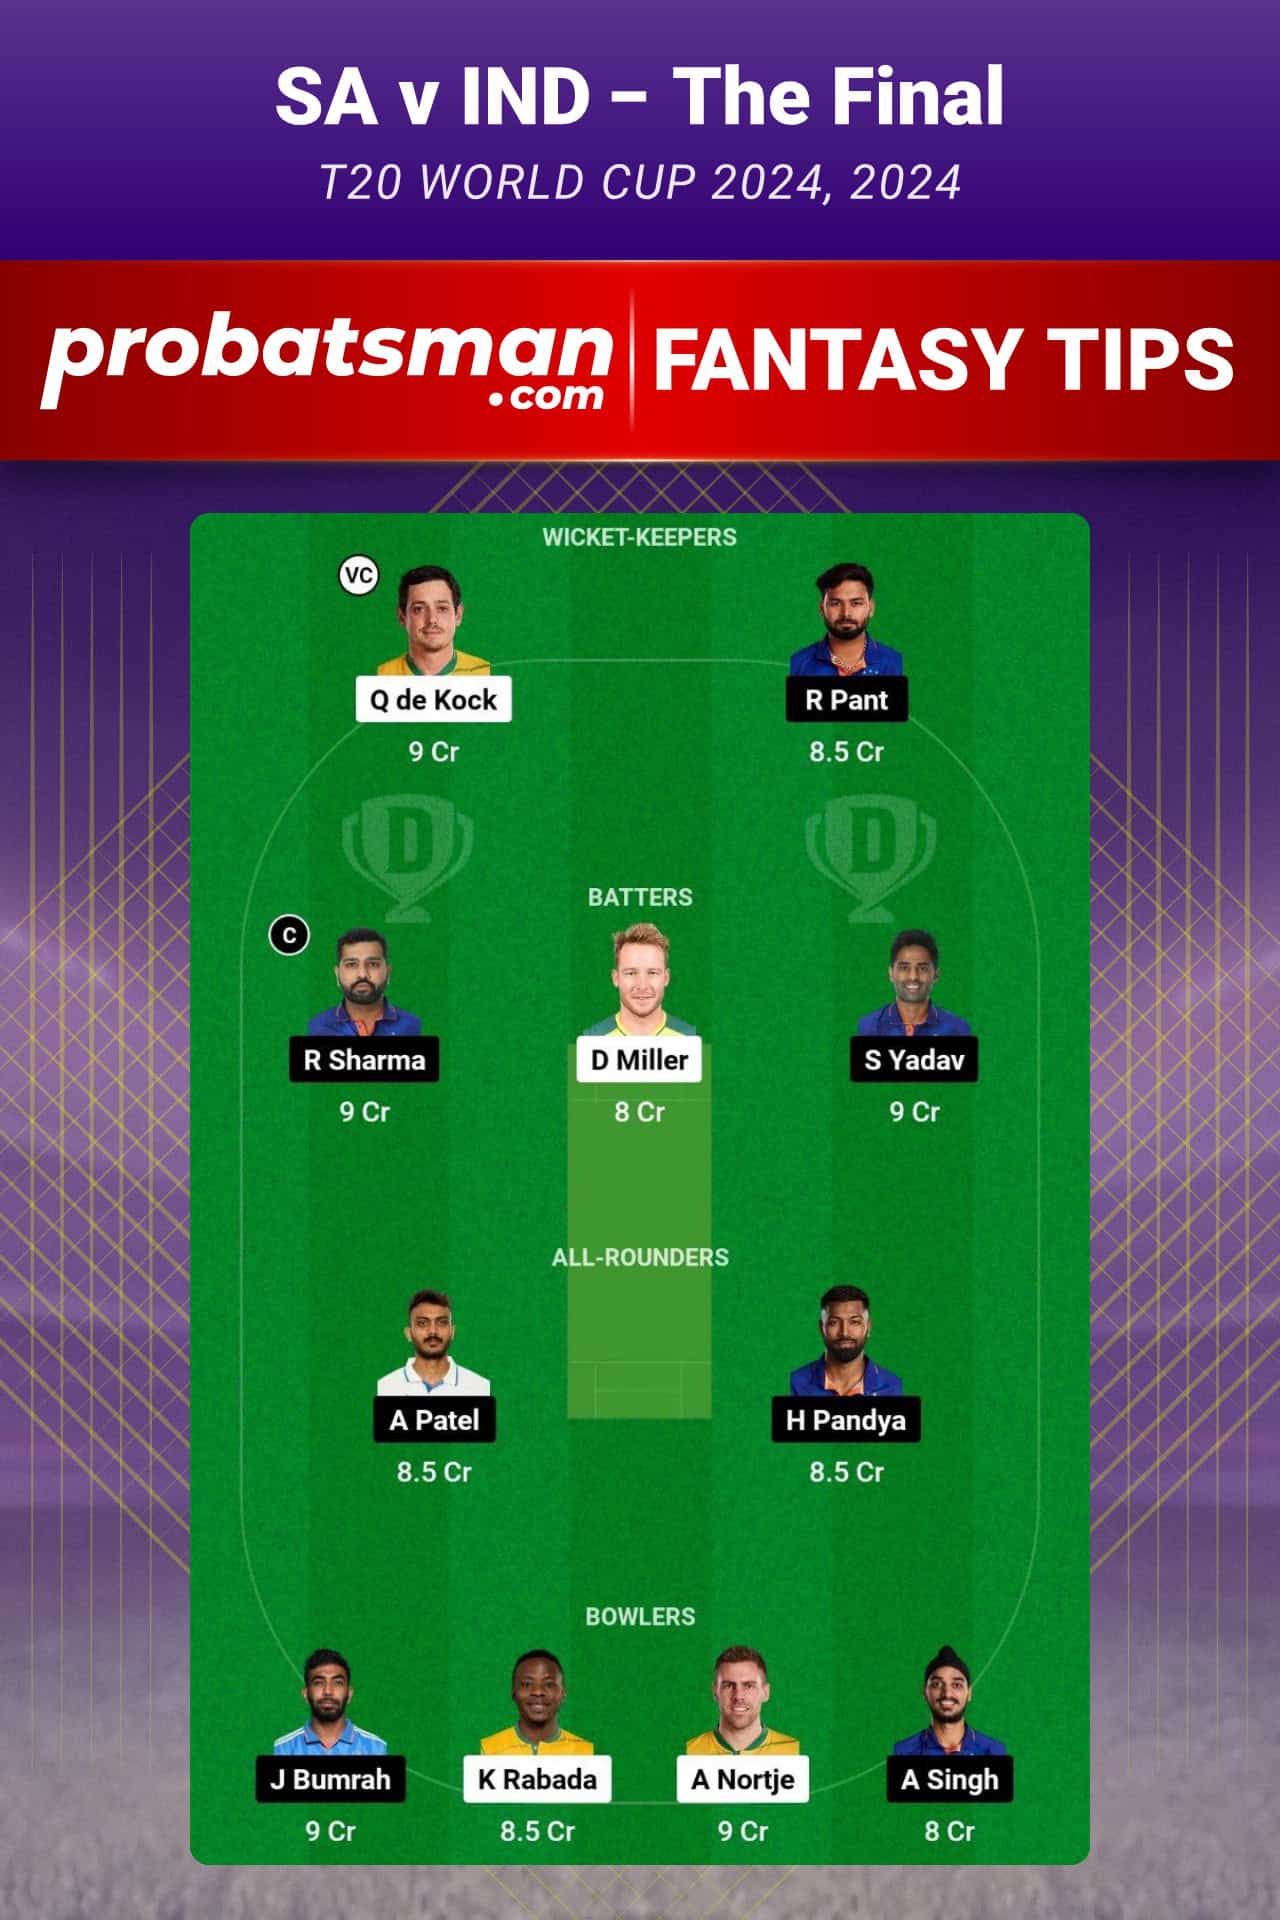 SA vs IND Dream11 Prediction For The Final of T20 World Cup 2024